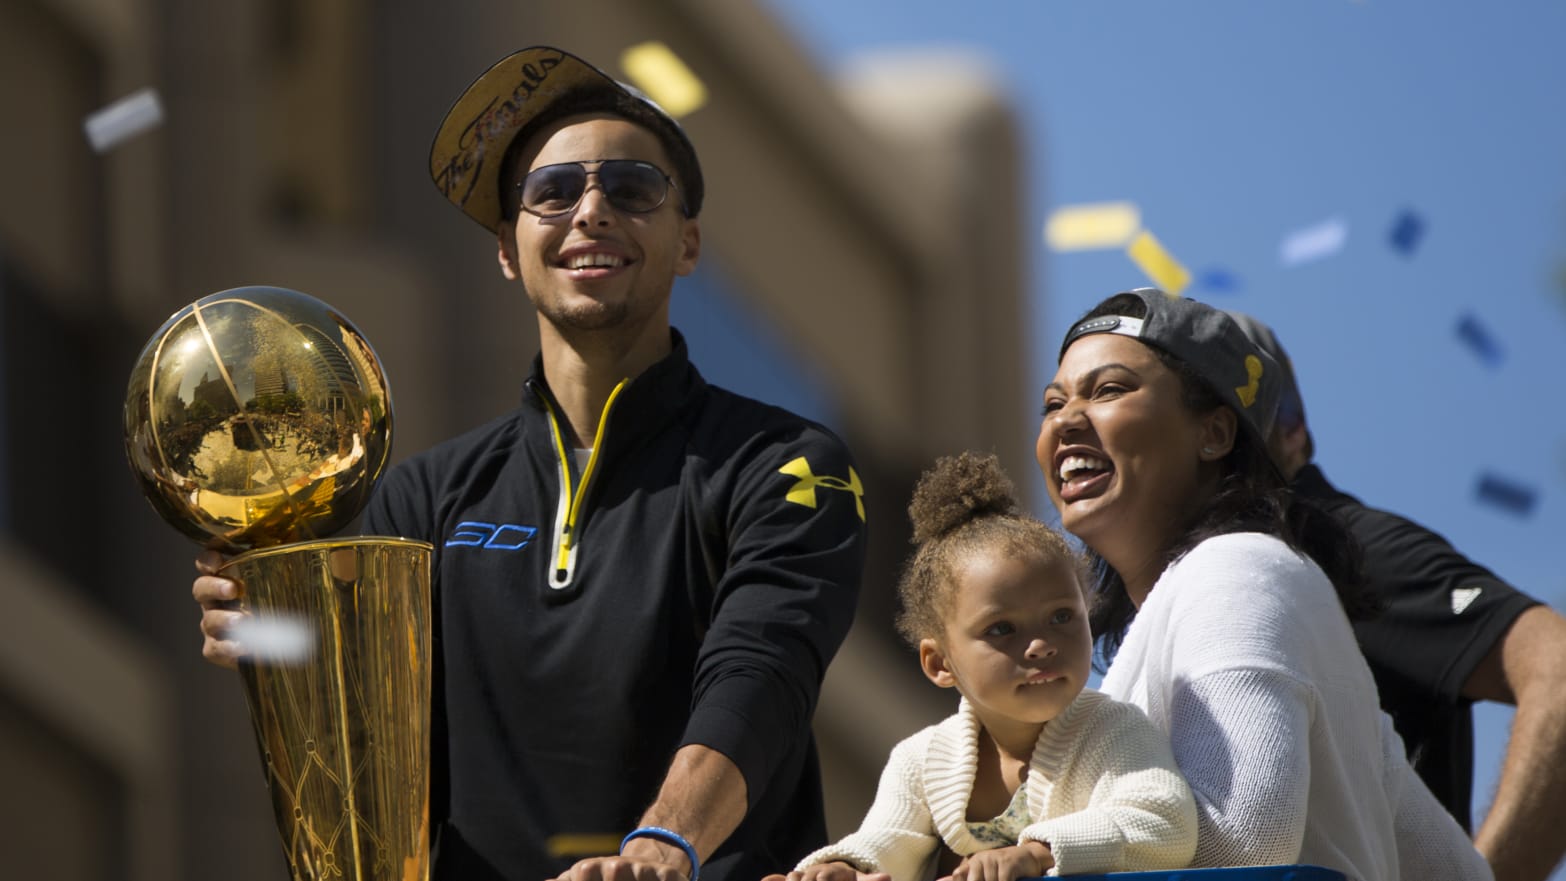 Steph Curry's Wife Ayesha Curry: How They Met, Married, Kids - Parade